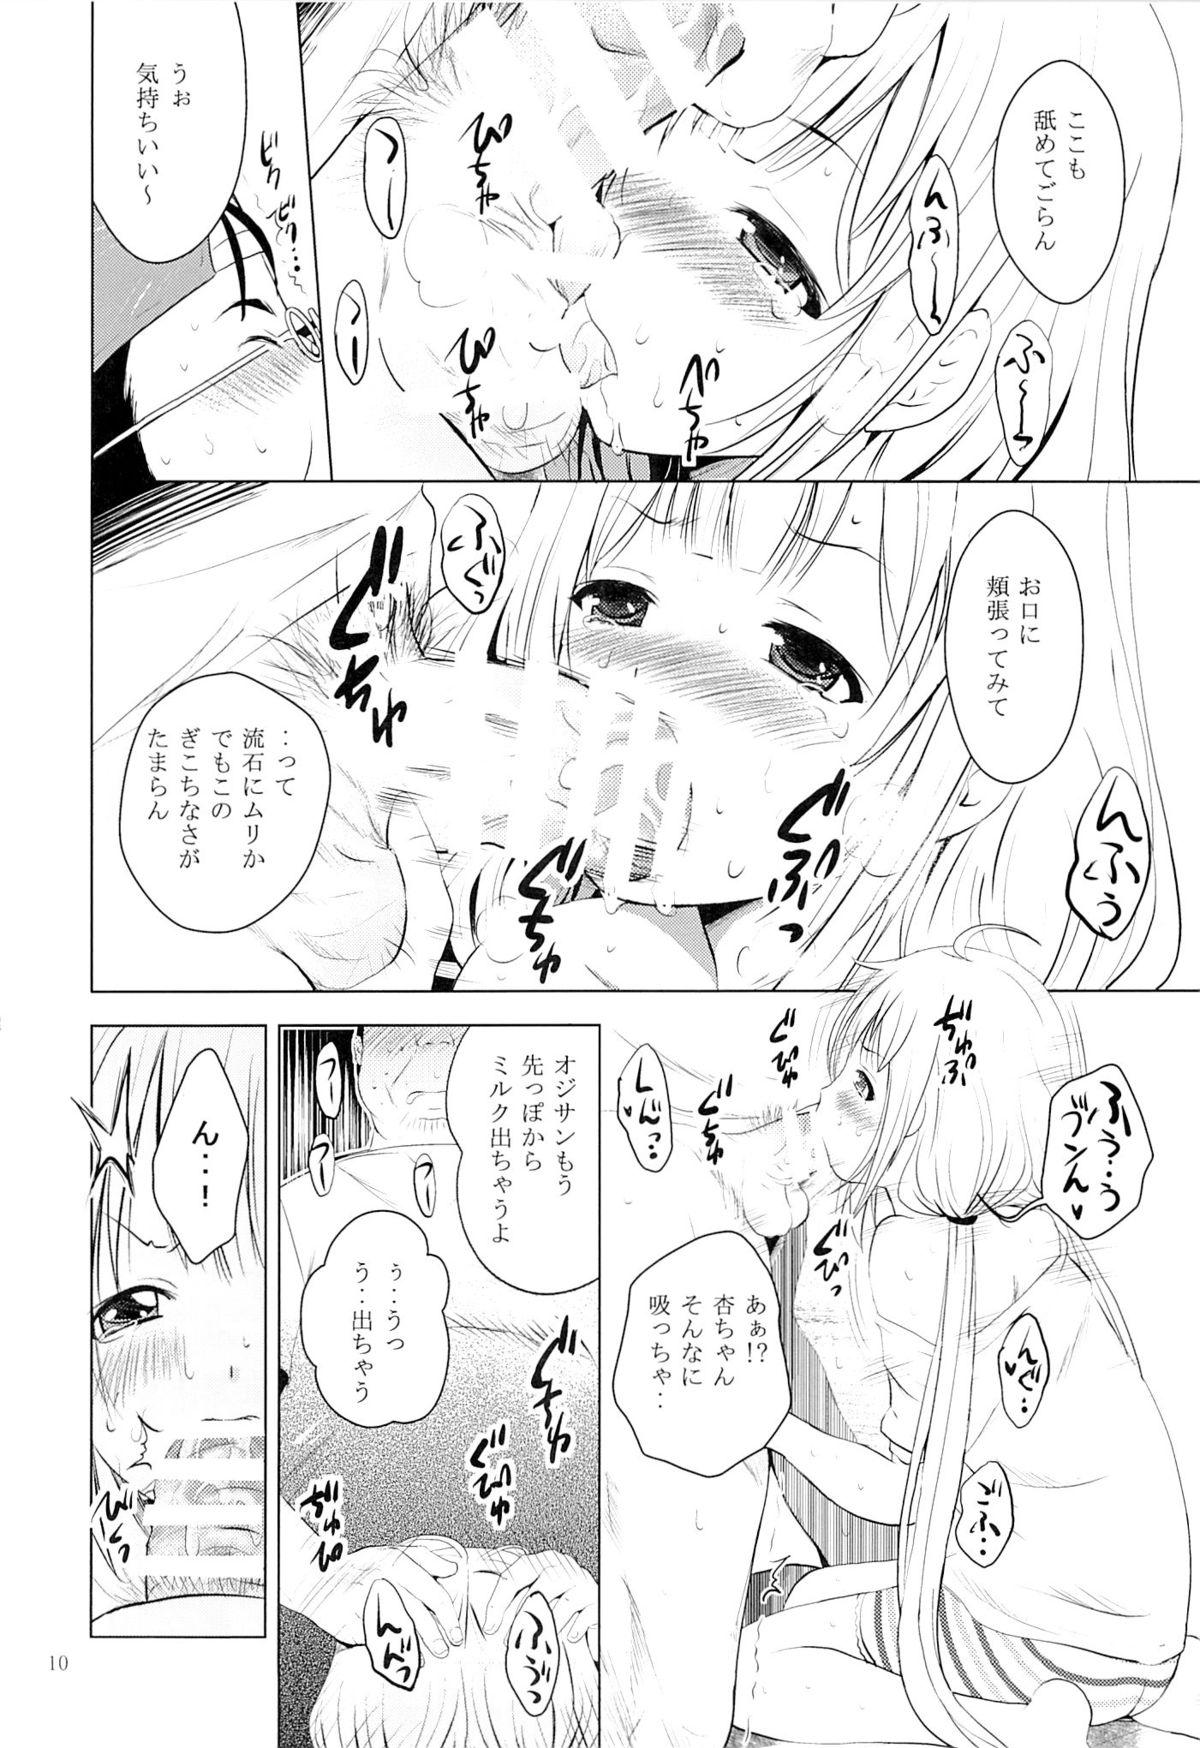 Crazy MOUSOU Mini Theater 37 - The idolmaster Les - Page 9